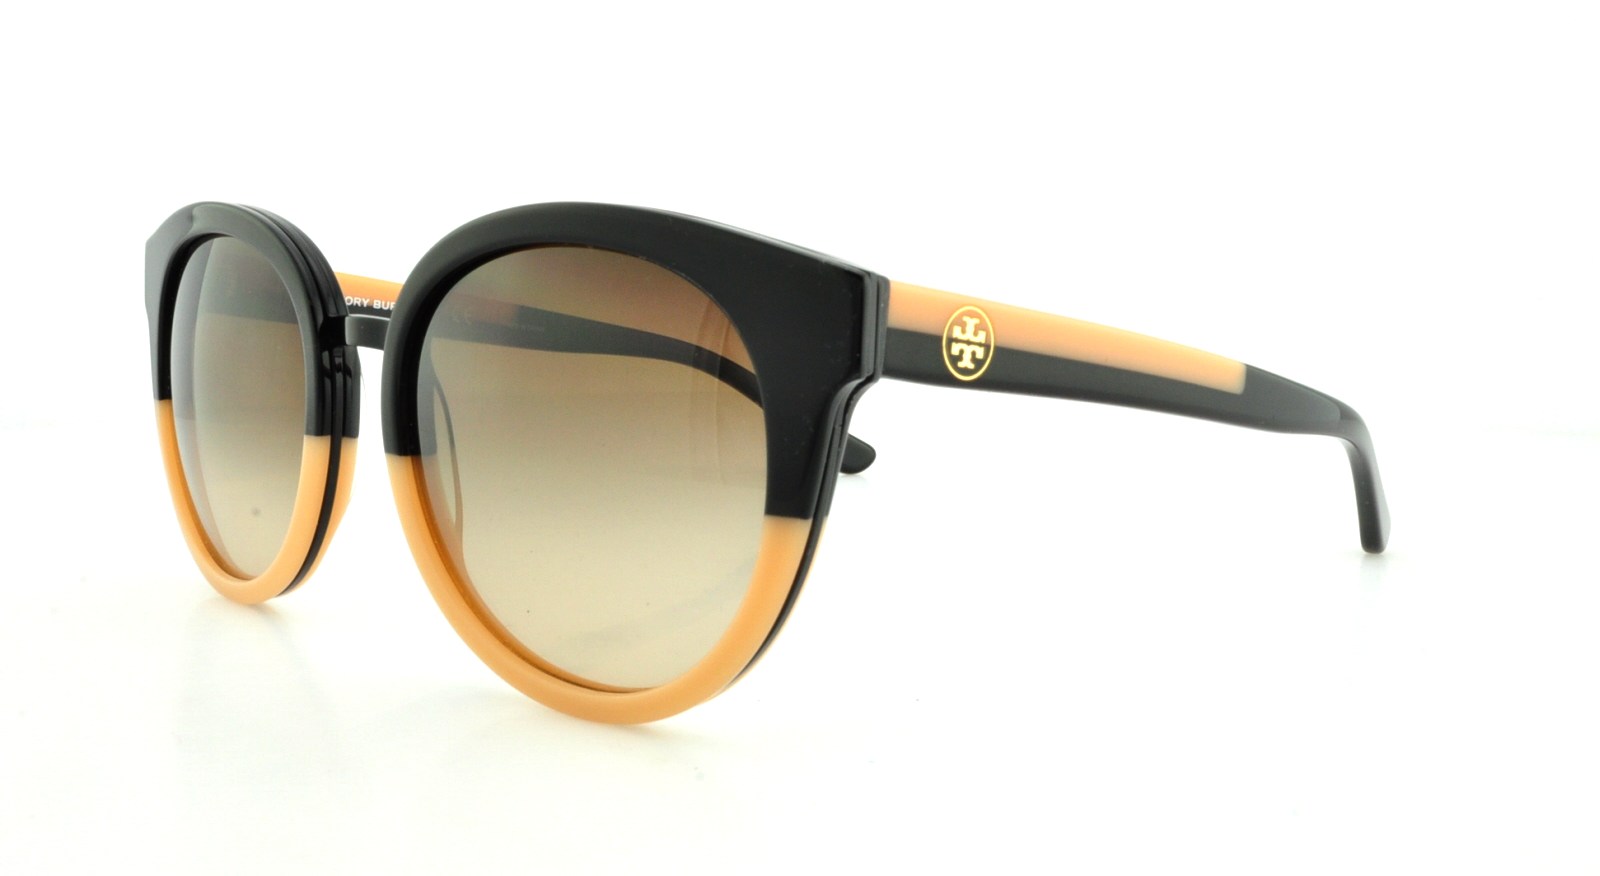 Designer Frames Outlet. Tory Burch Sunglasses TY7062 Panama